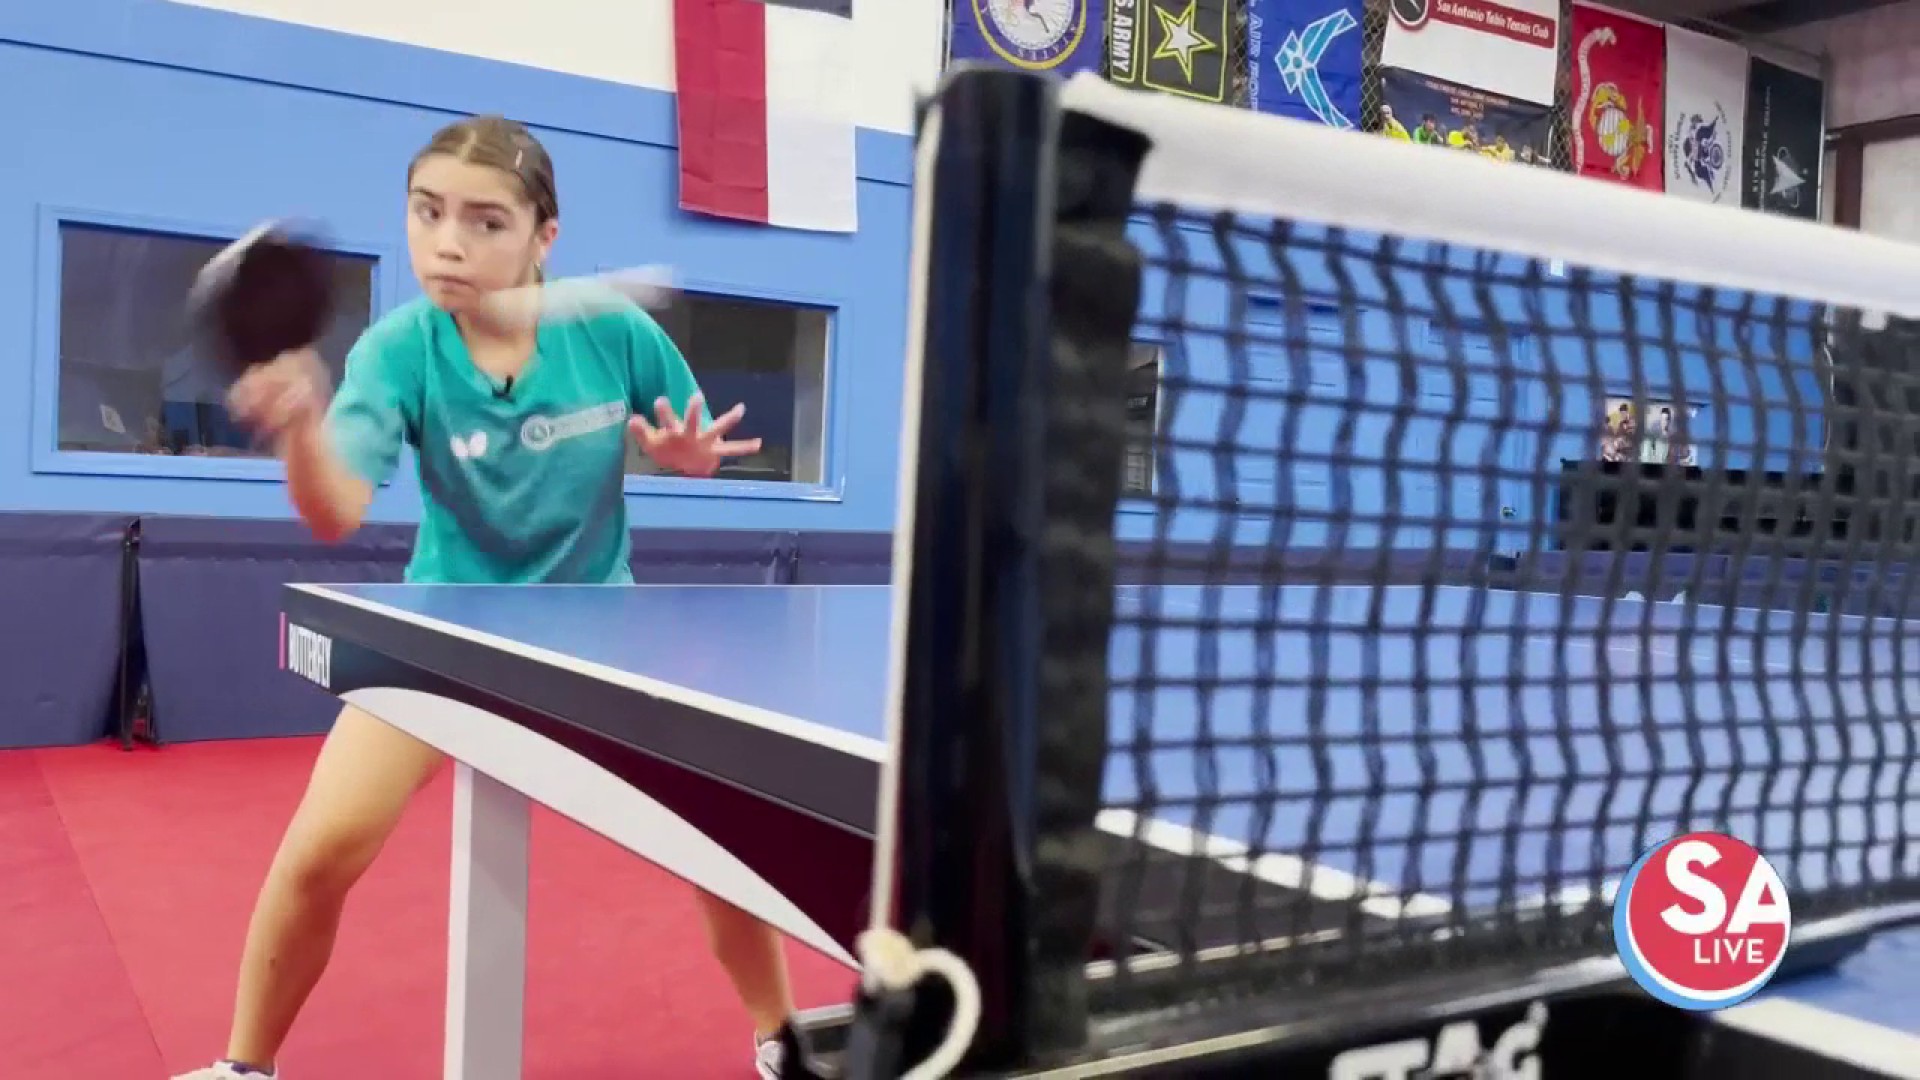 This 12-year-old table tennis star is representing San Antonio